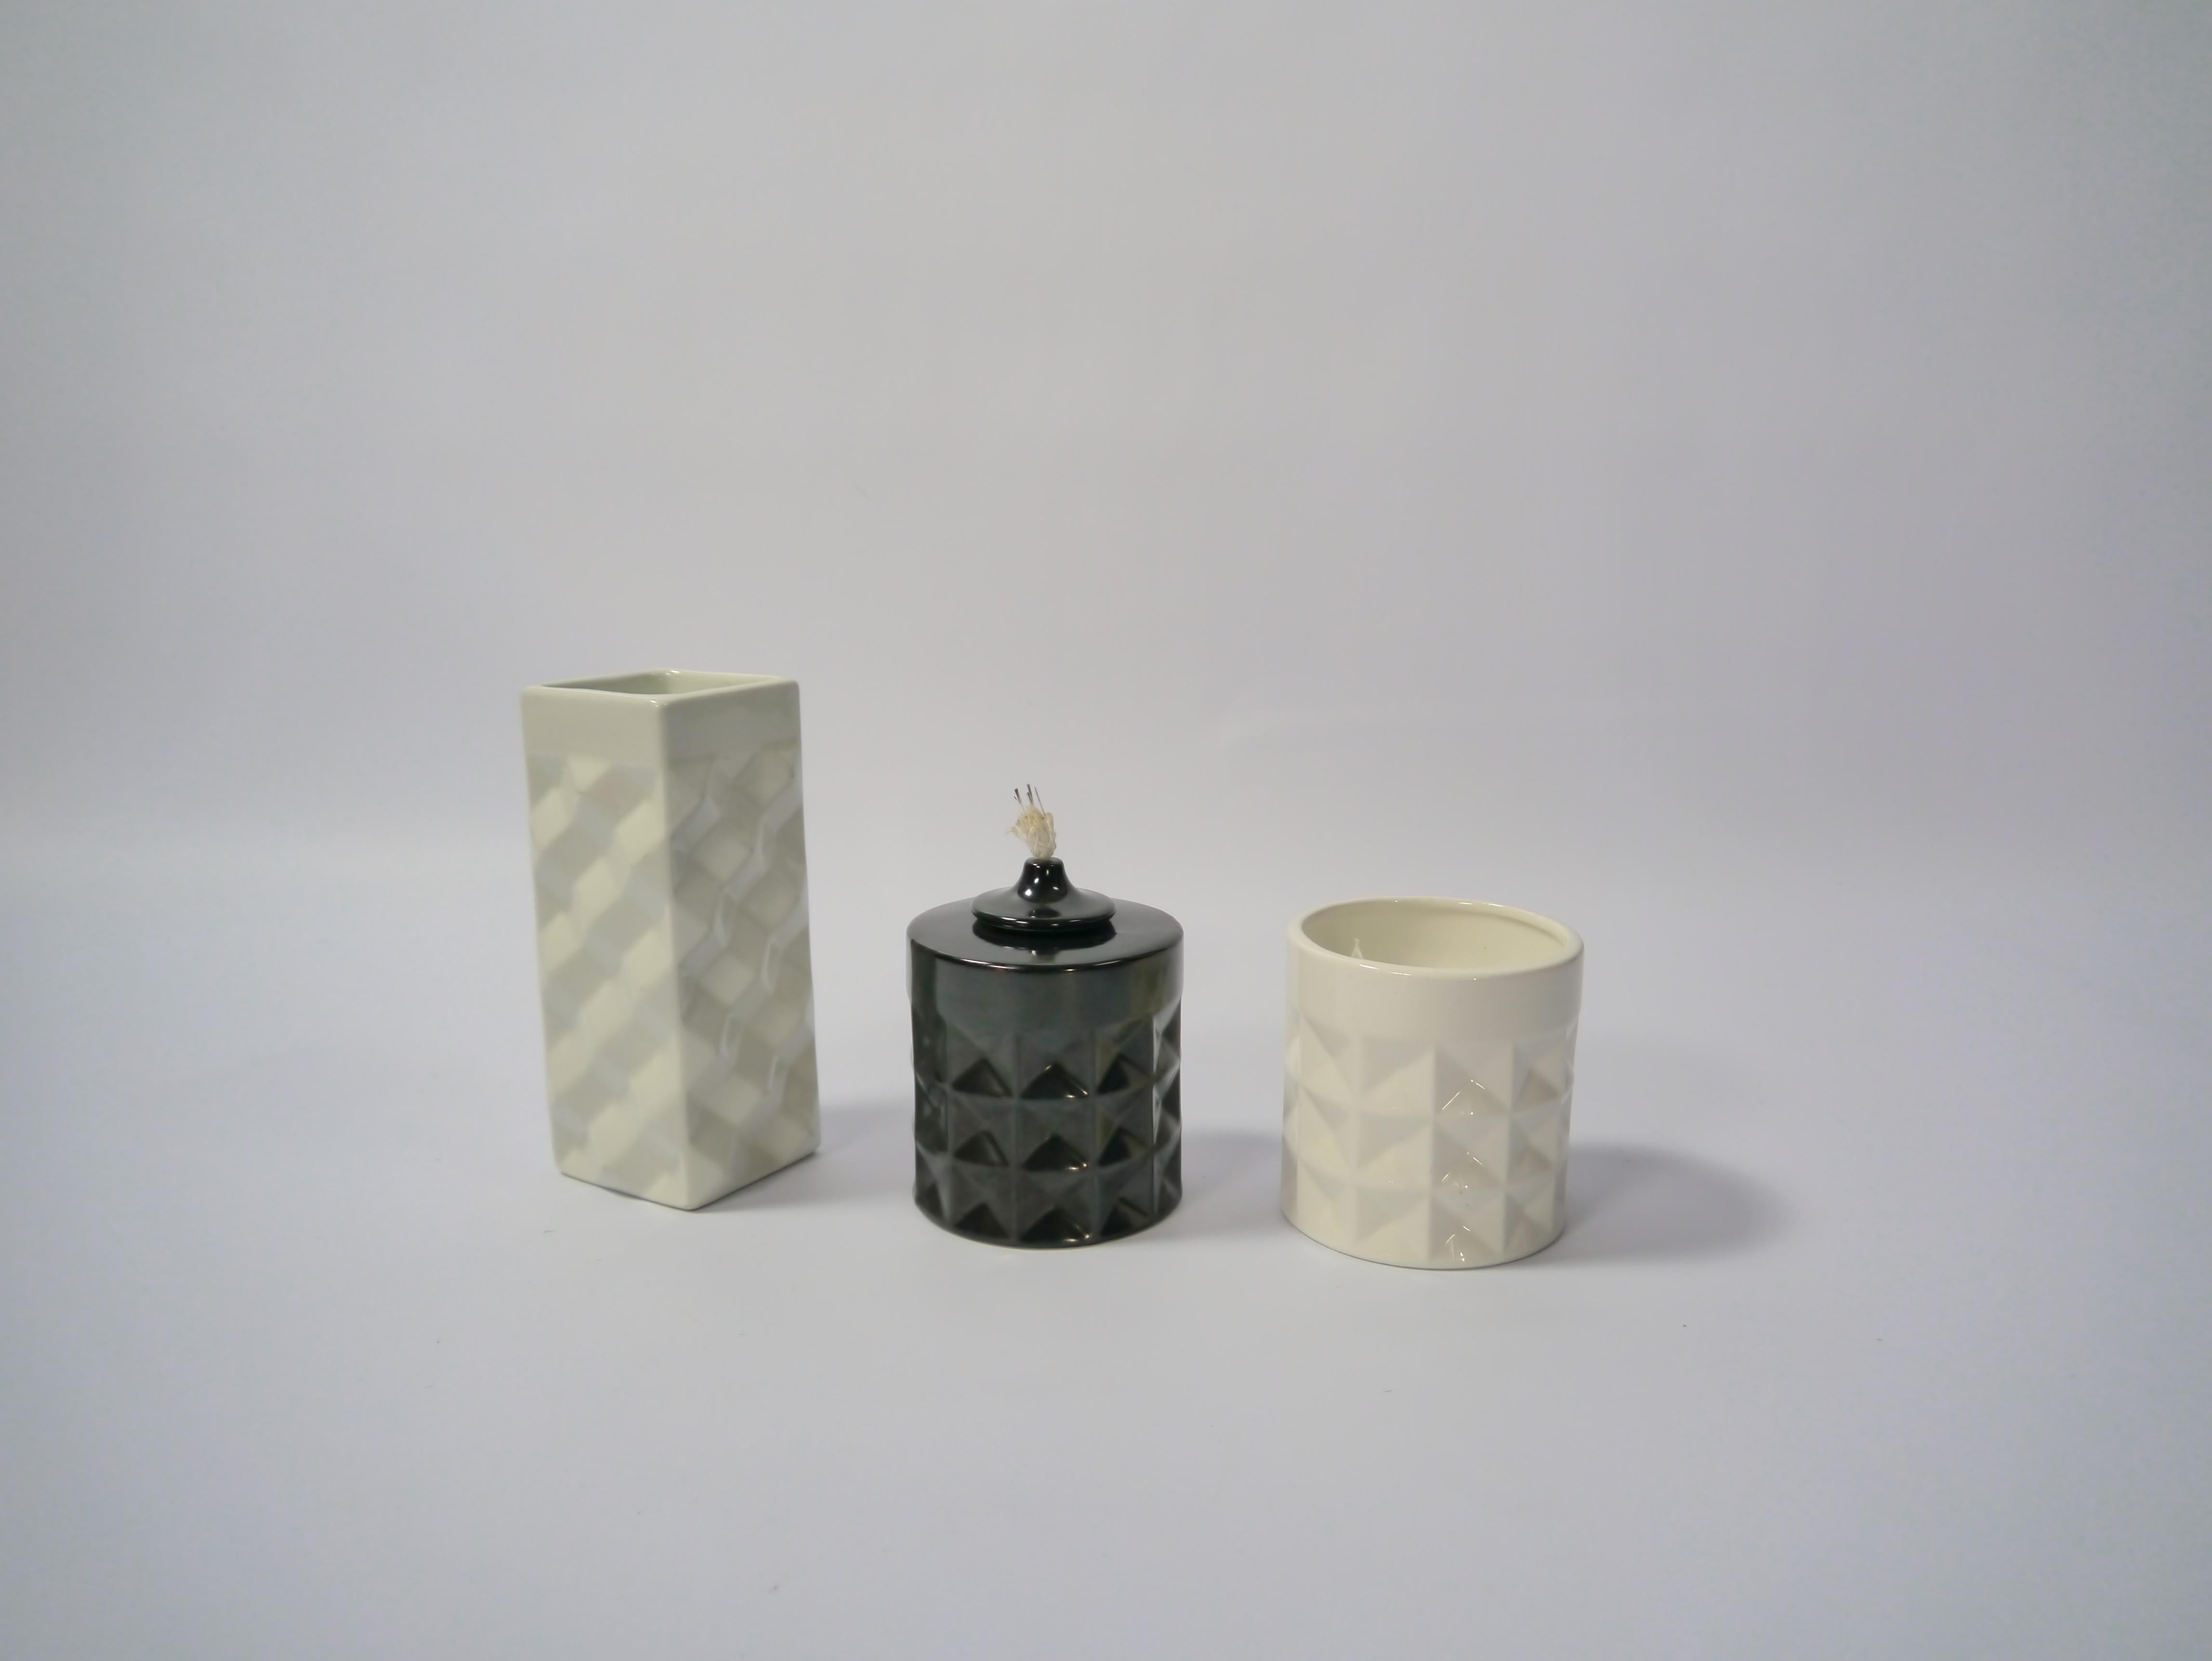 Two vases and one oil lamp from the same series designed by Hermann Bongard for Figgjo Flint, Norway 1960s.